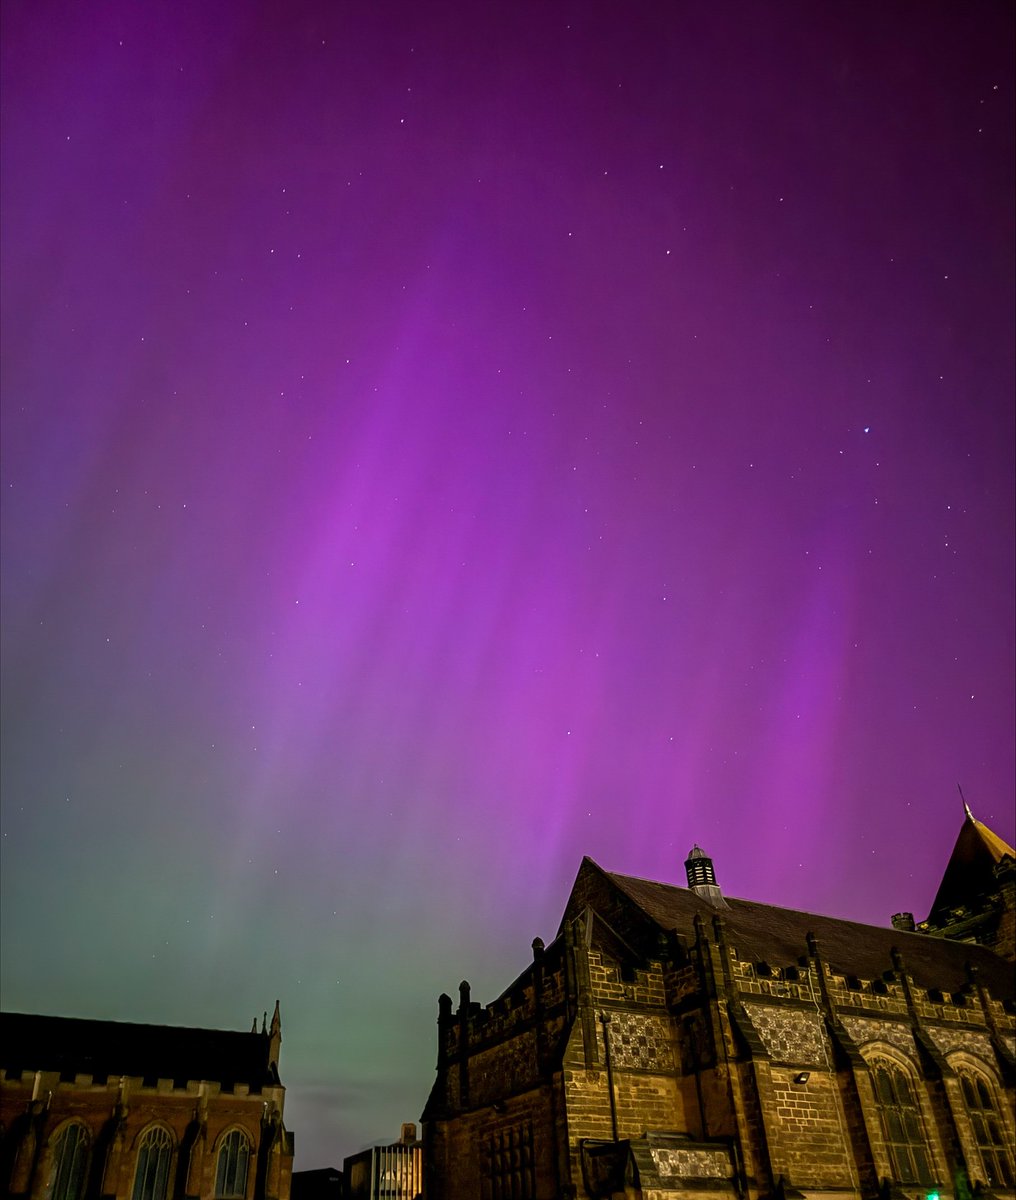 The Northern Lights made a rare appearance in Tonbridge last night. Our thanks to Andrew Davison, CCF Adjutant, for capturing the phenomenon at the School, early this morning (Saturday 11 May).